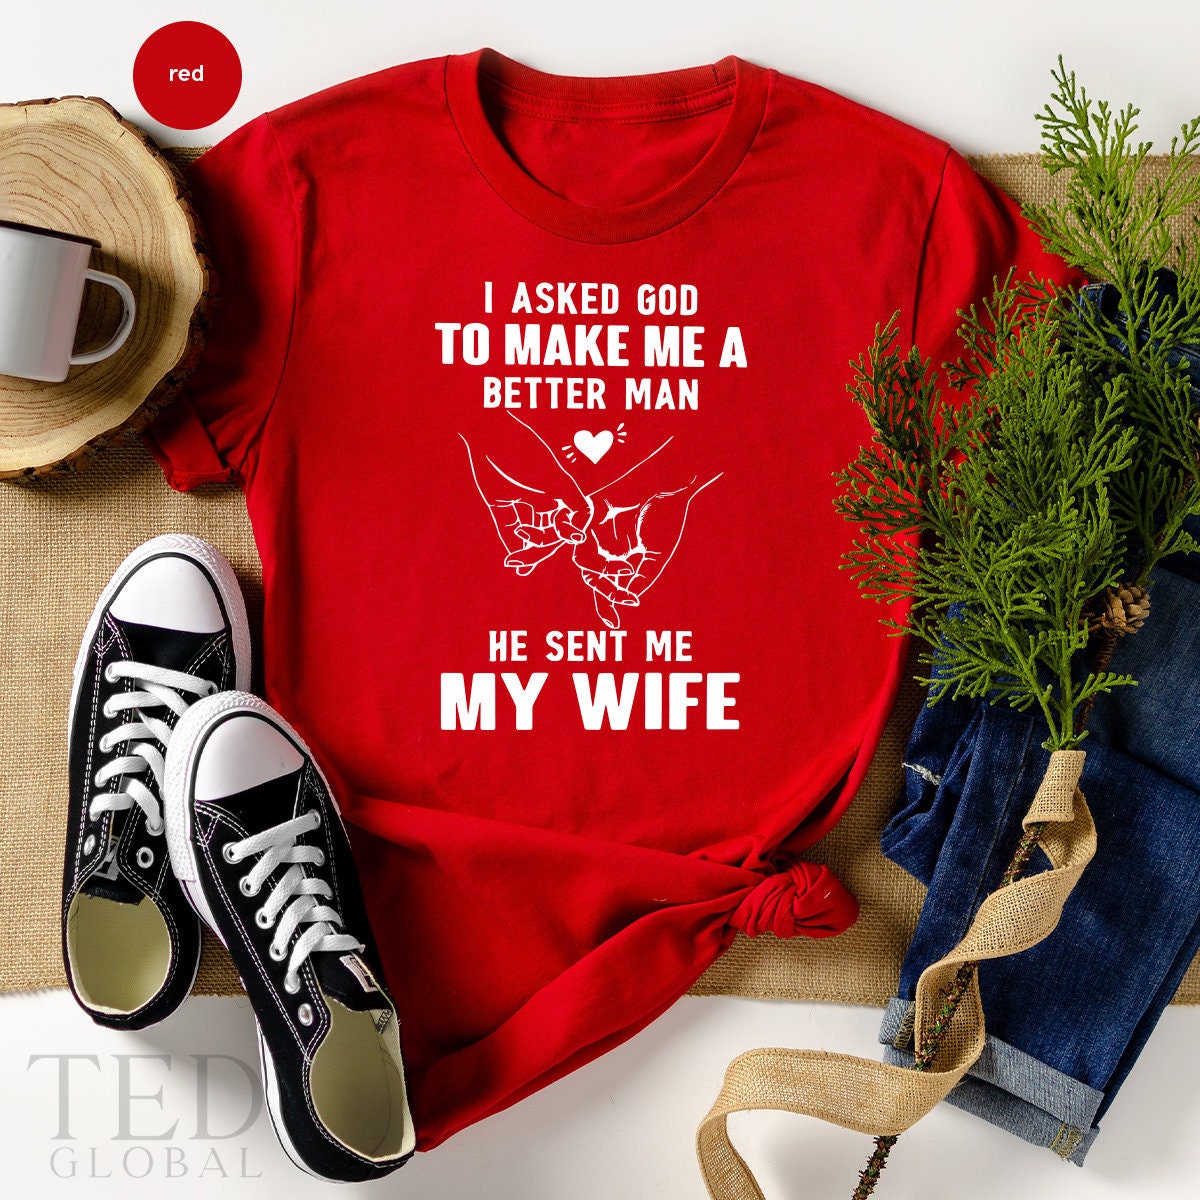 Wife T Shirt, Wife Birthday Shirt, Blessed Husband TShirt, Valentines Shirt, I Asked God To Make Me A Better Man Shirt, Fathers Day Tee - Fastdeliverytees.com